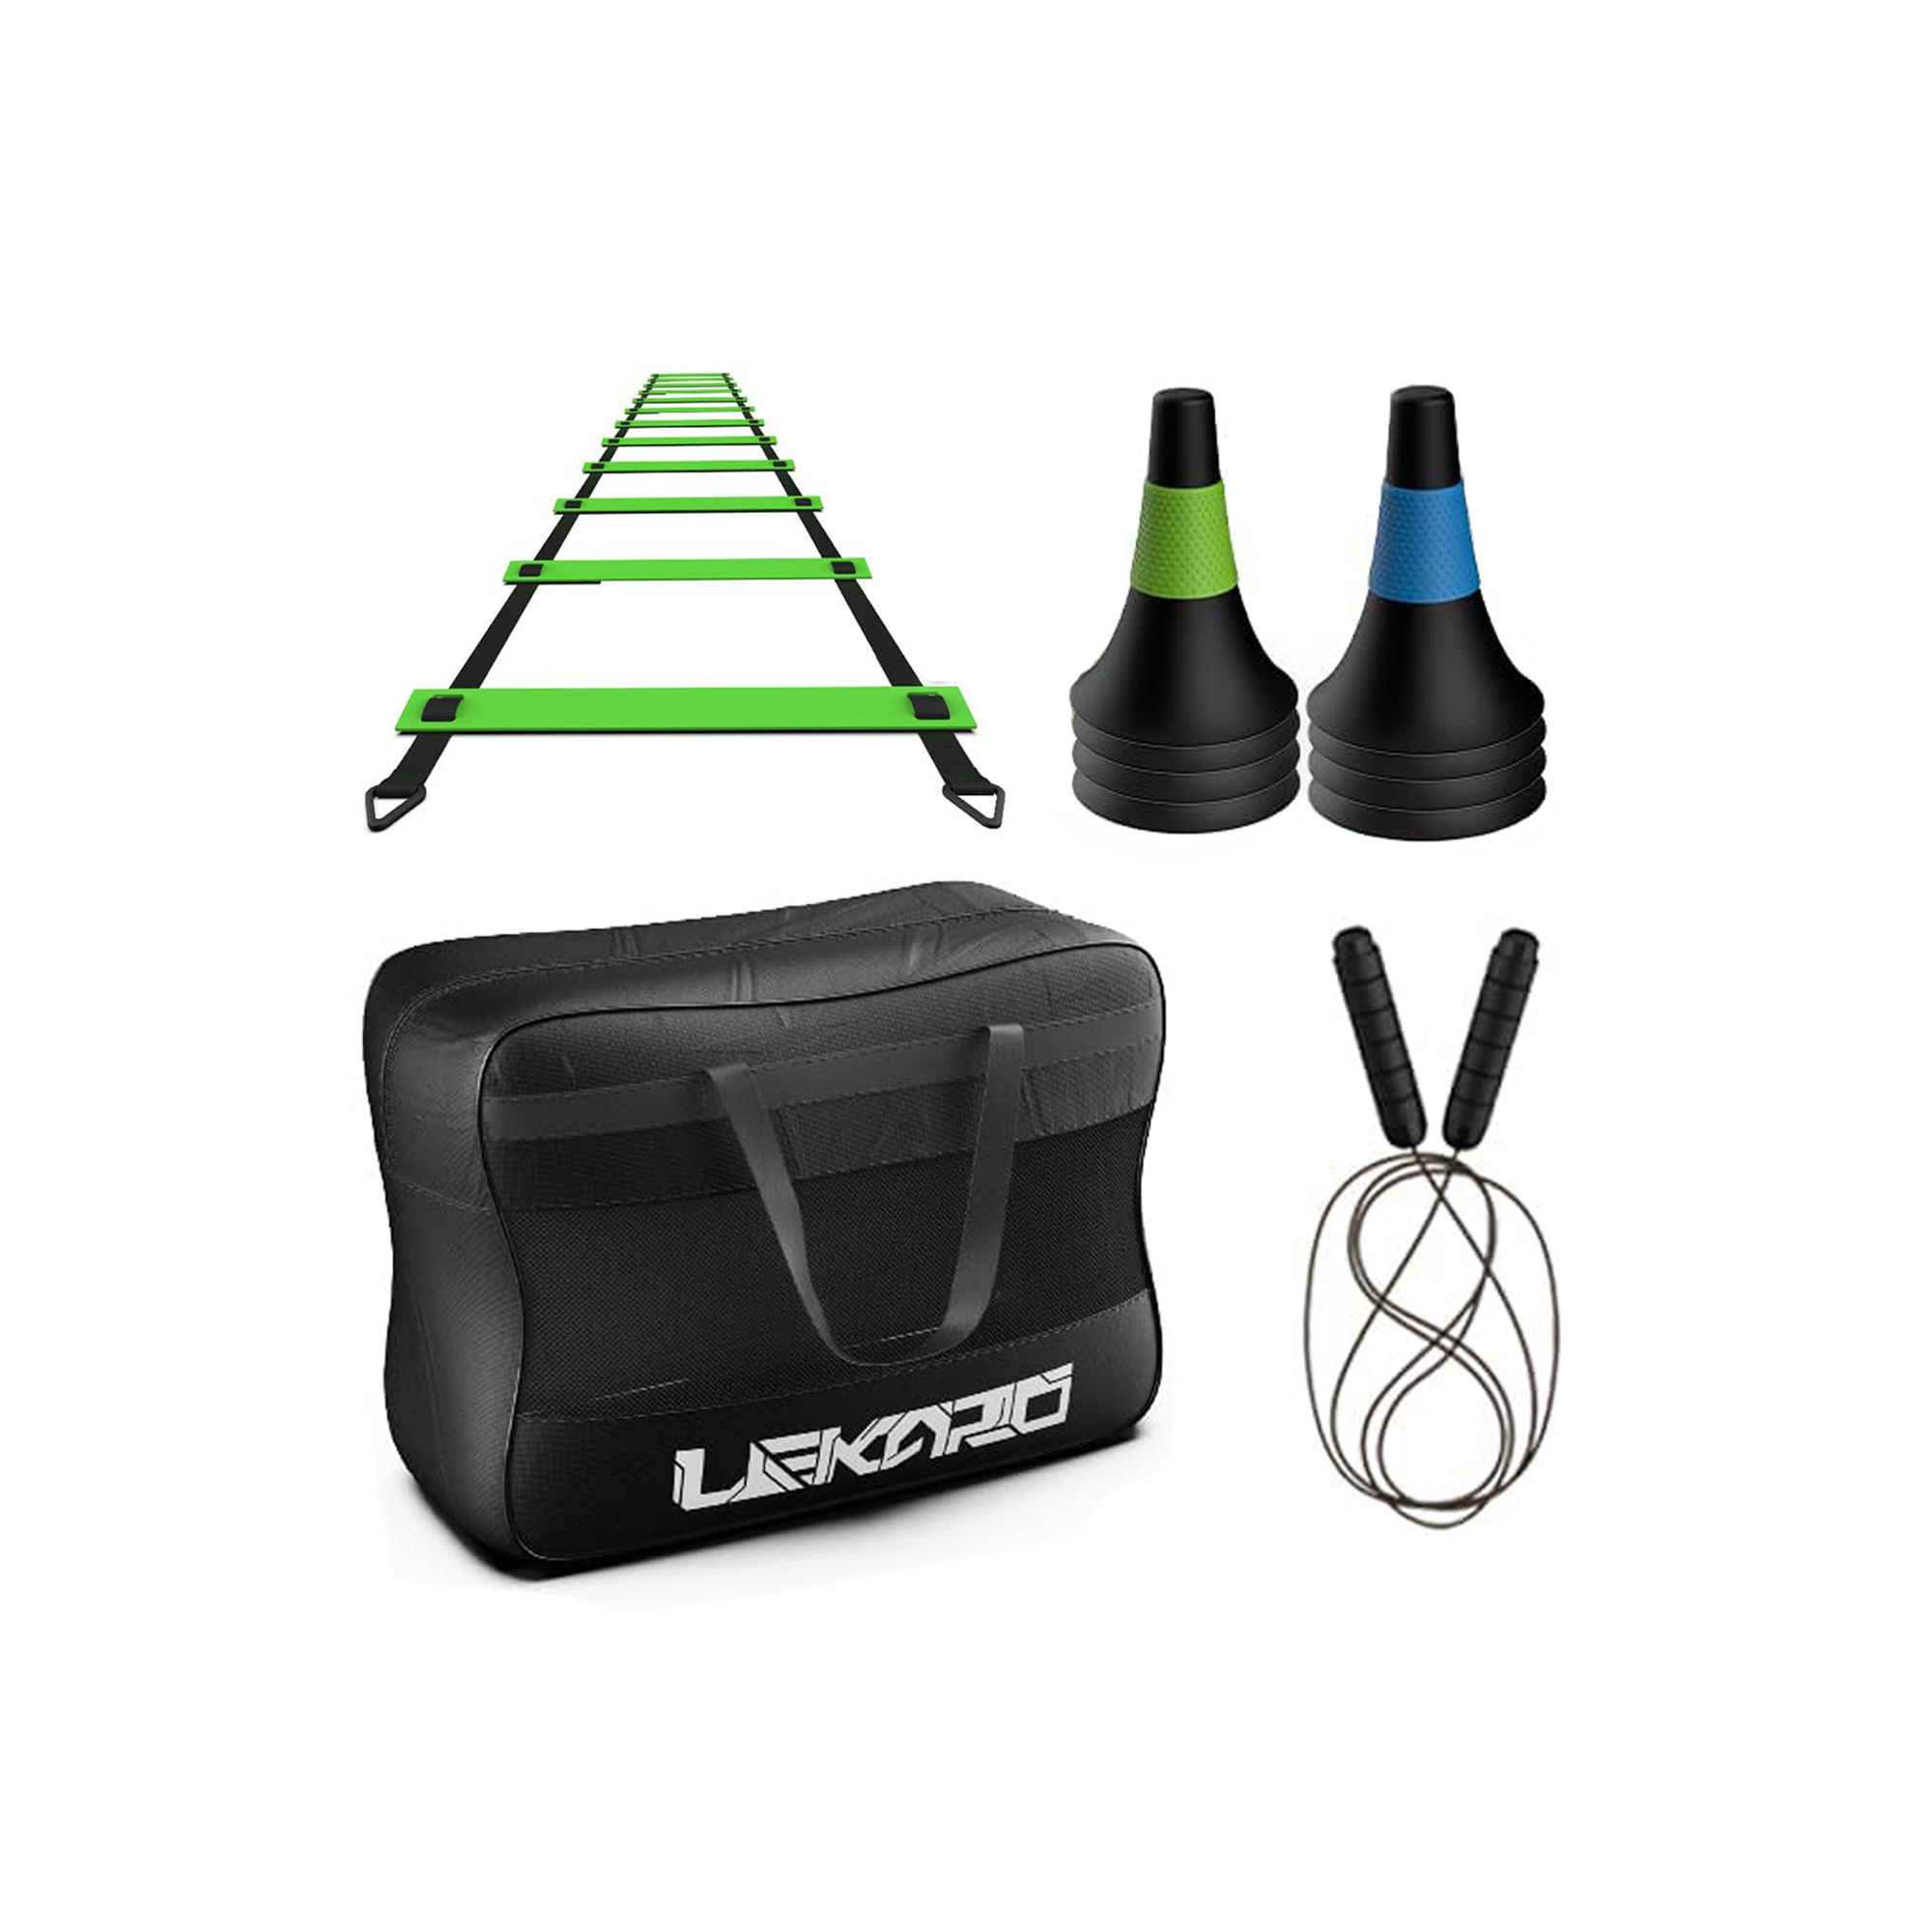 Basketball Speed Training Equipment Kit with Adjustable Hurdles Agility Cones and Resistance Parachute,-for Football 1 Reaction Ball LEKÄRO Agility Training Equipment Hockey Training Athletes 